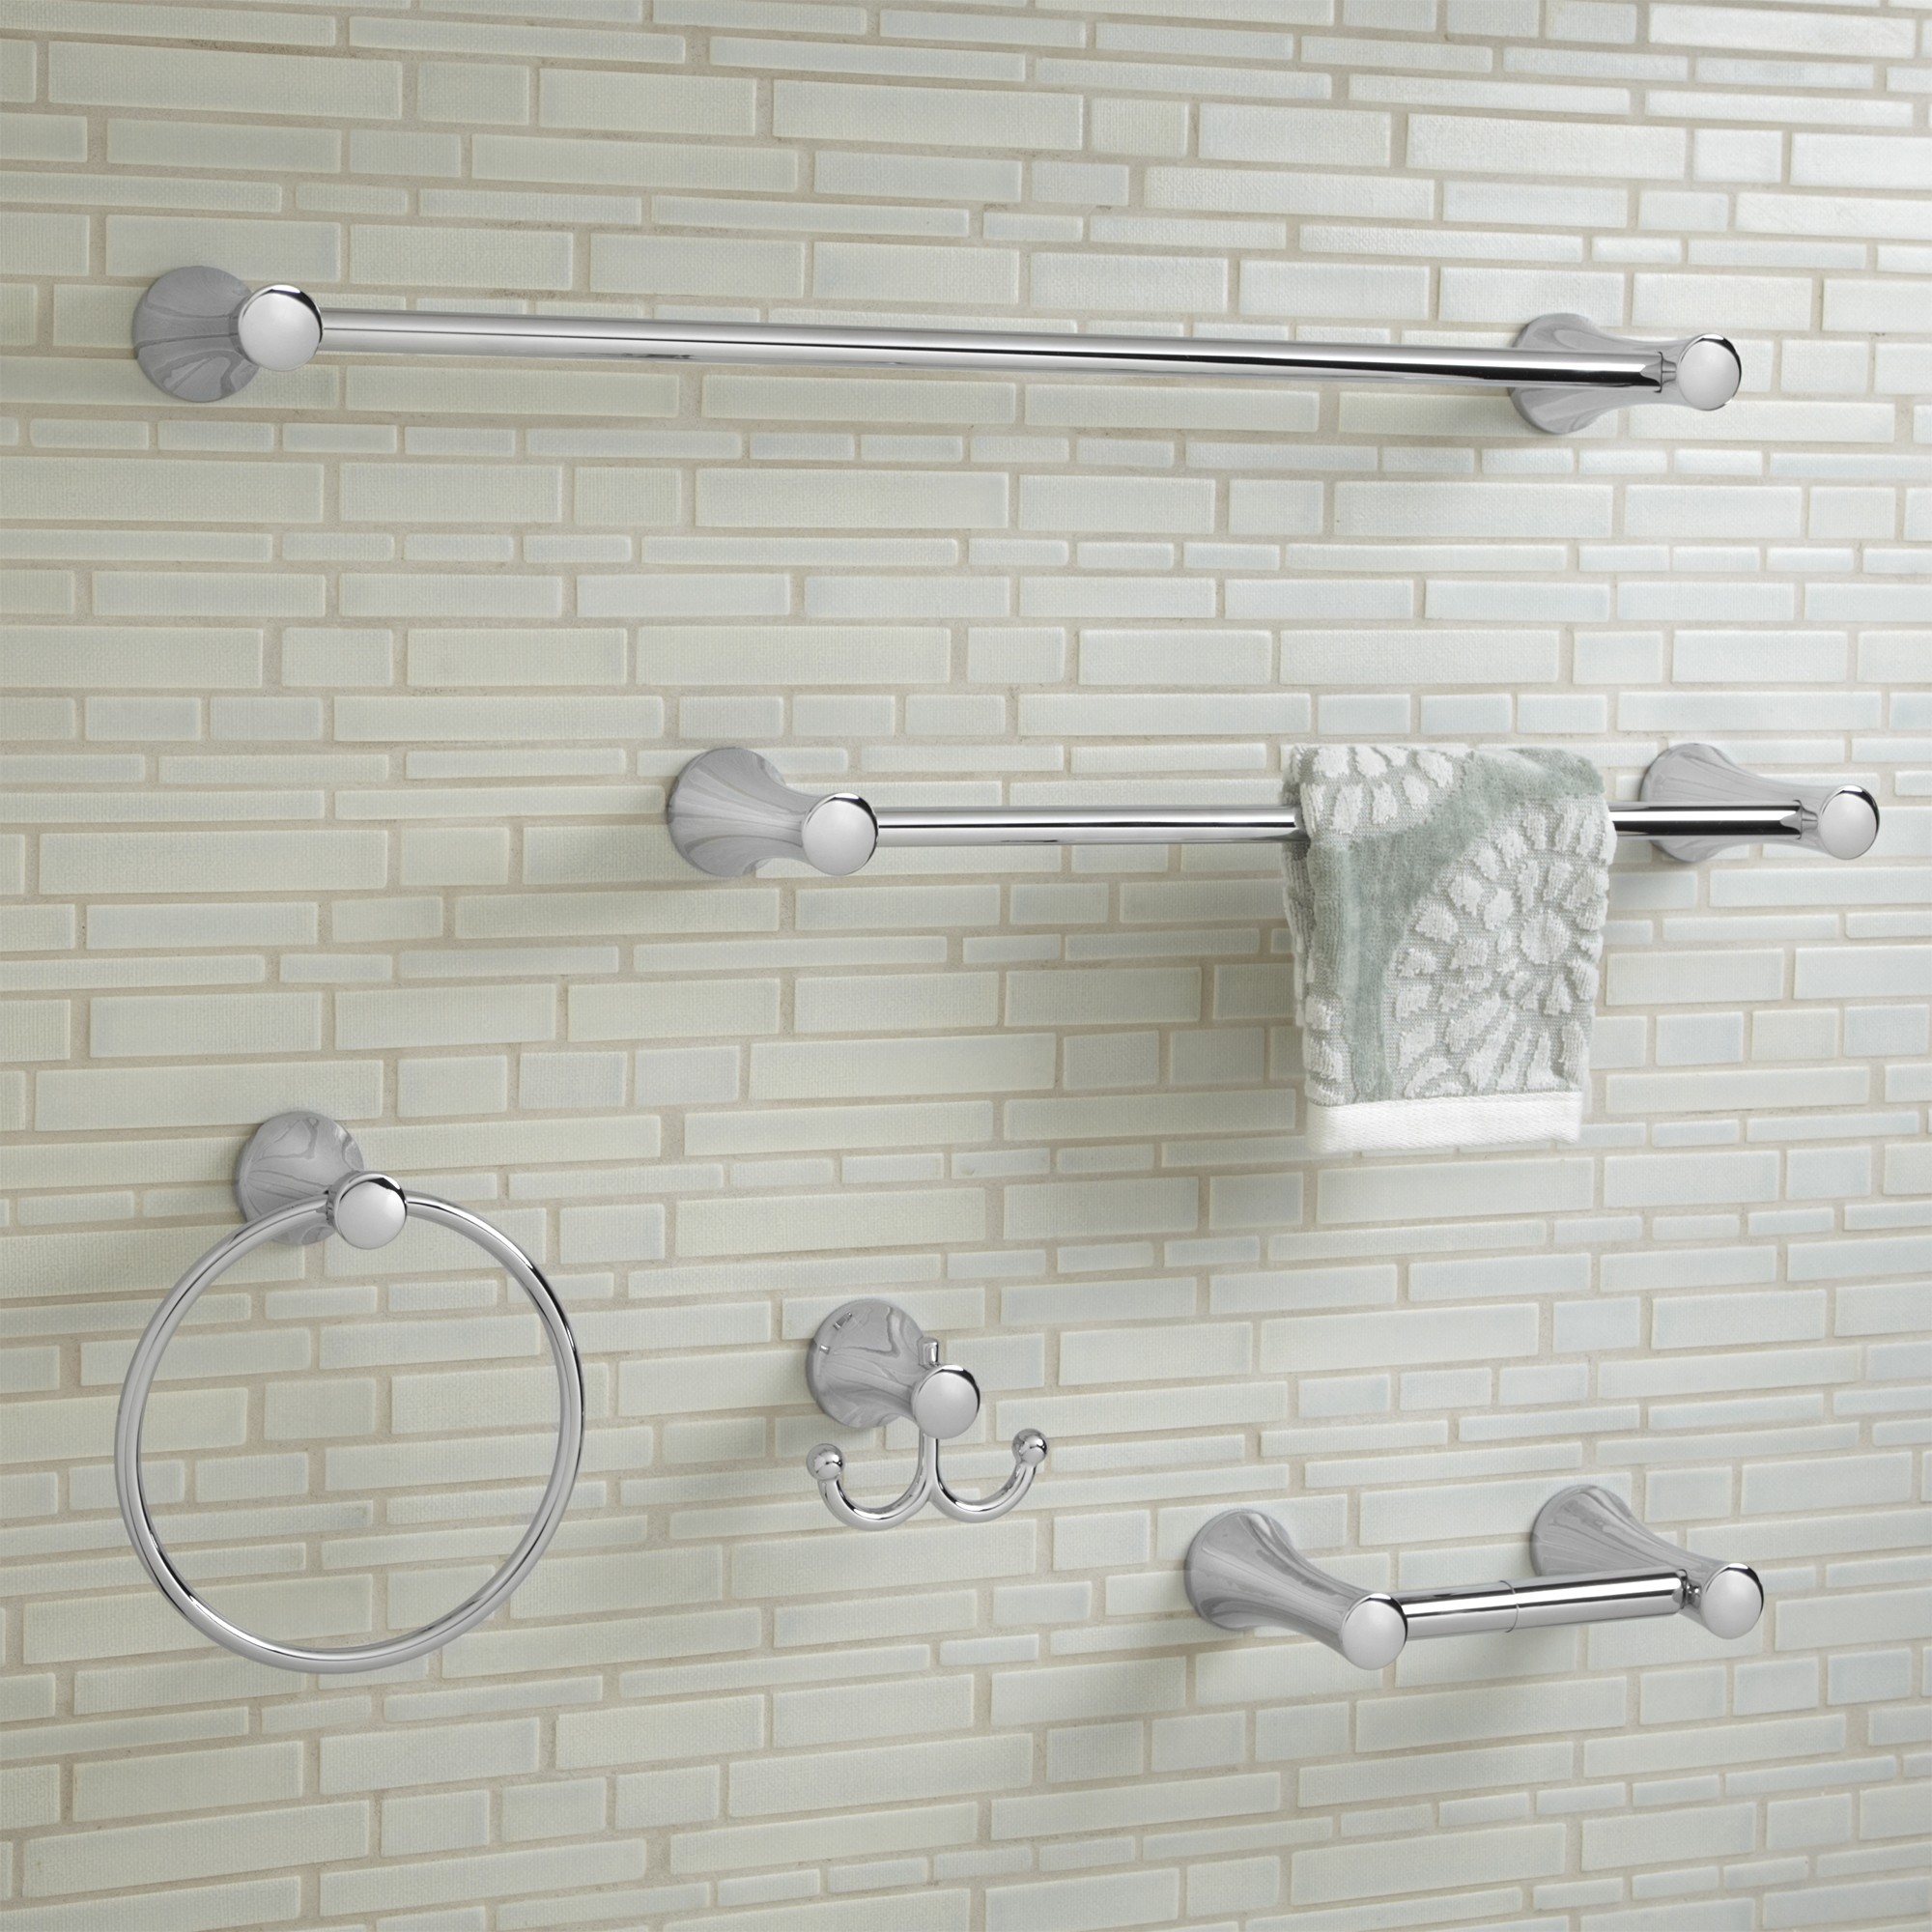 American Standard | 8337.230.002 | AMERICAN STANDARD 8337.230 TRANSITIONAL TOILET PAPER HOLDER CP 002 CHROME